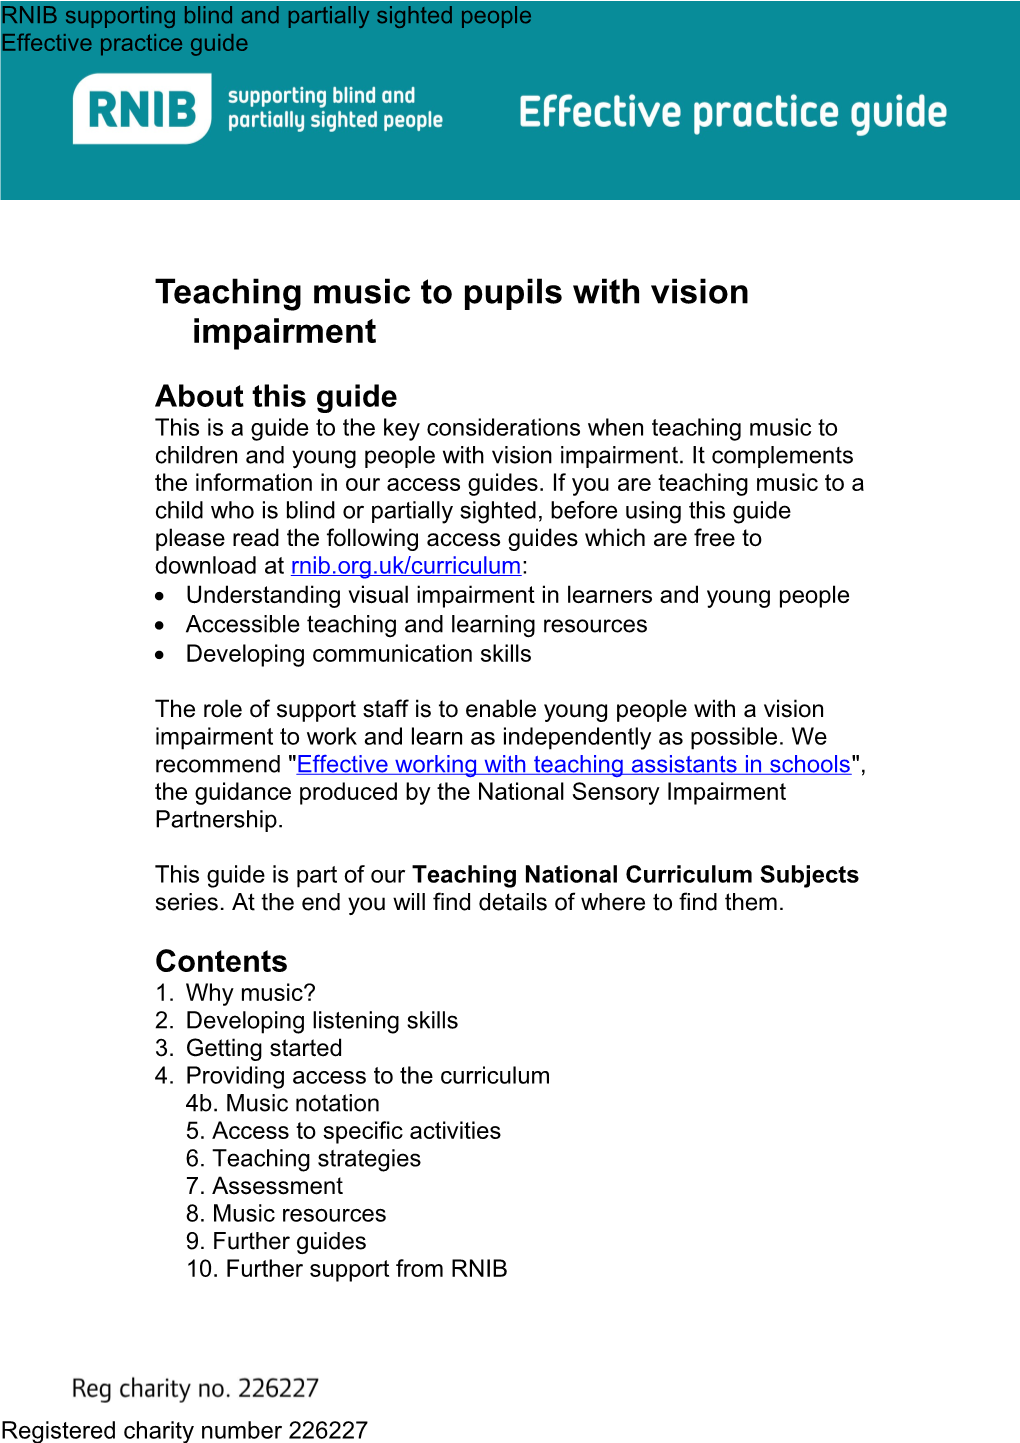 Teaching Music to Pupils with Vision Impairment